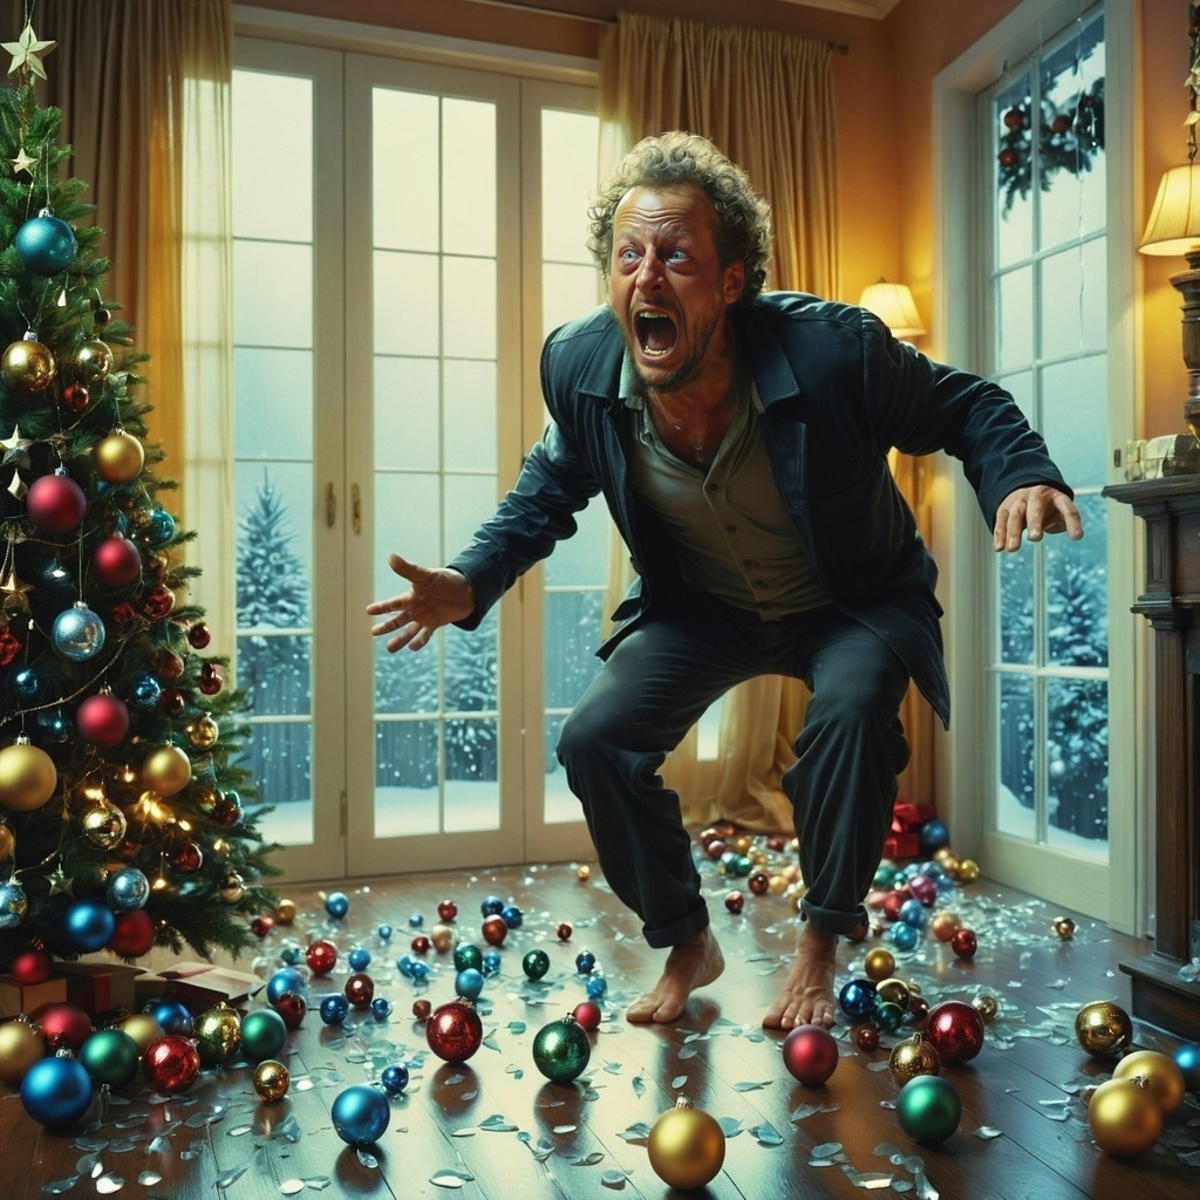 A man in a black jacket and white shirt is standing on a wooden floor, yelling and surrounded by Christmas ornaments.